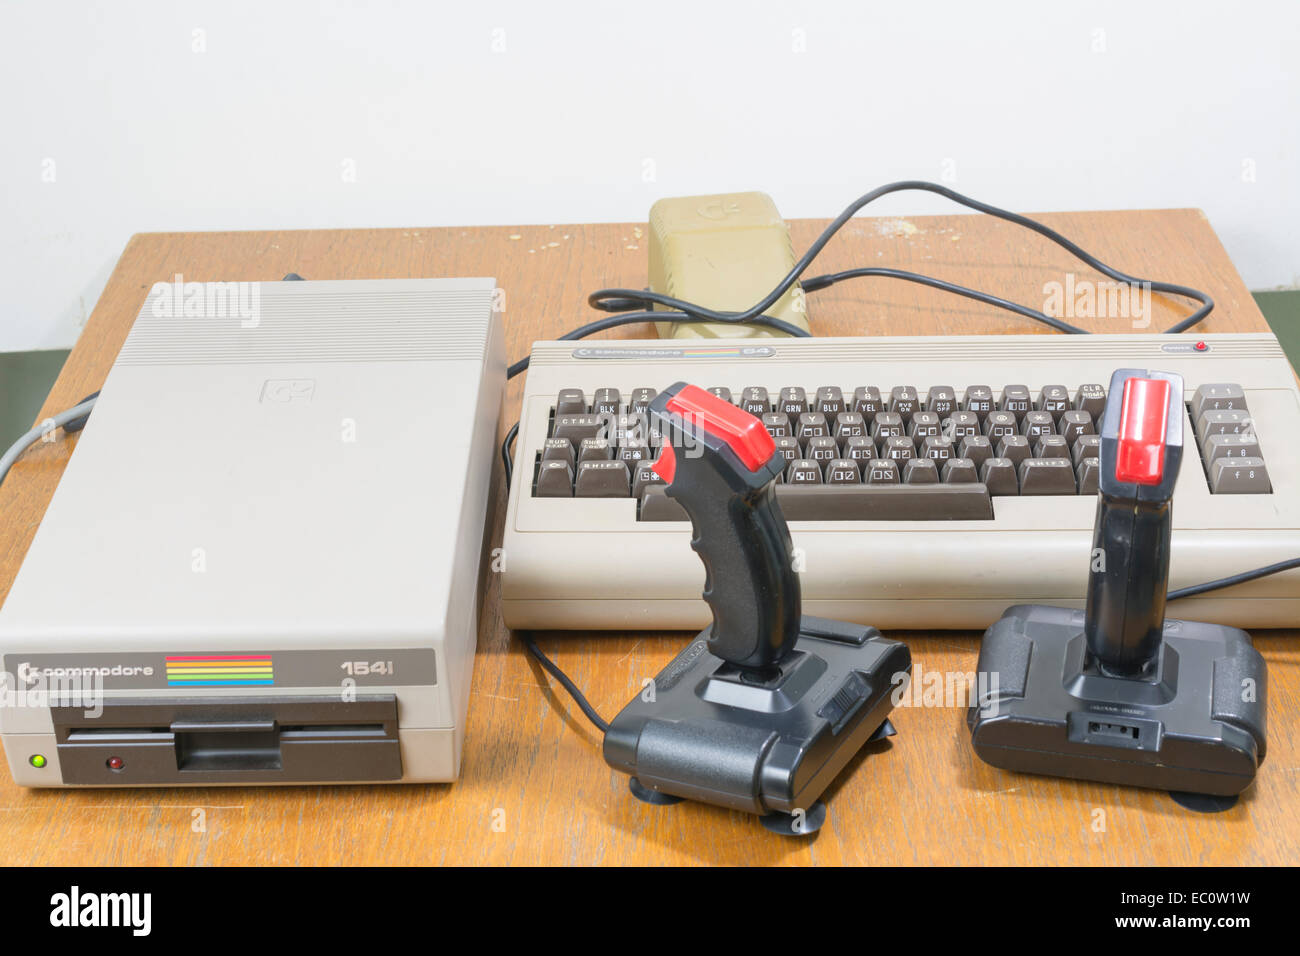 Vintage Computer Commodore 64 with two Joysticks and a floppy drive Stock Photo